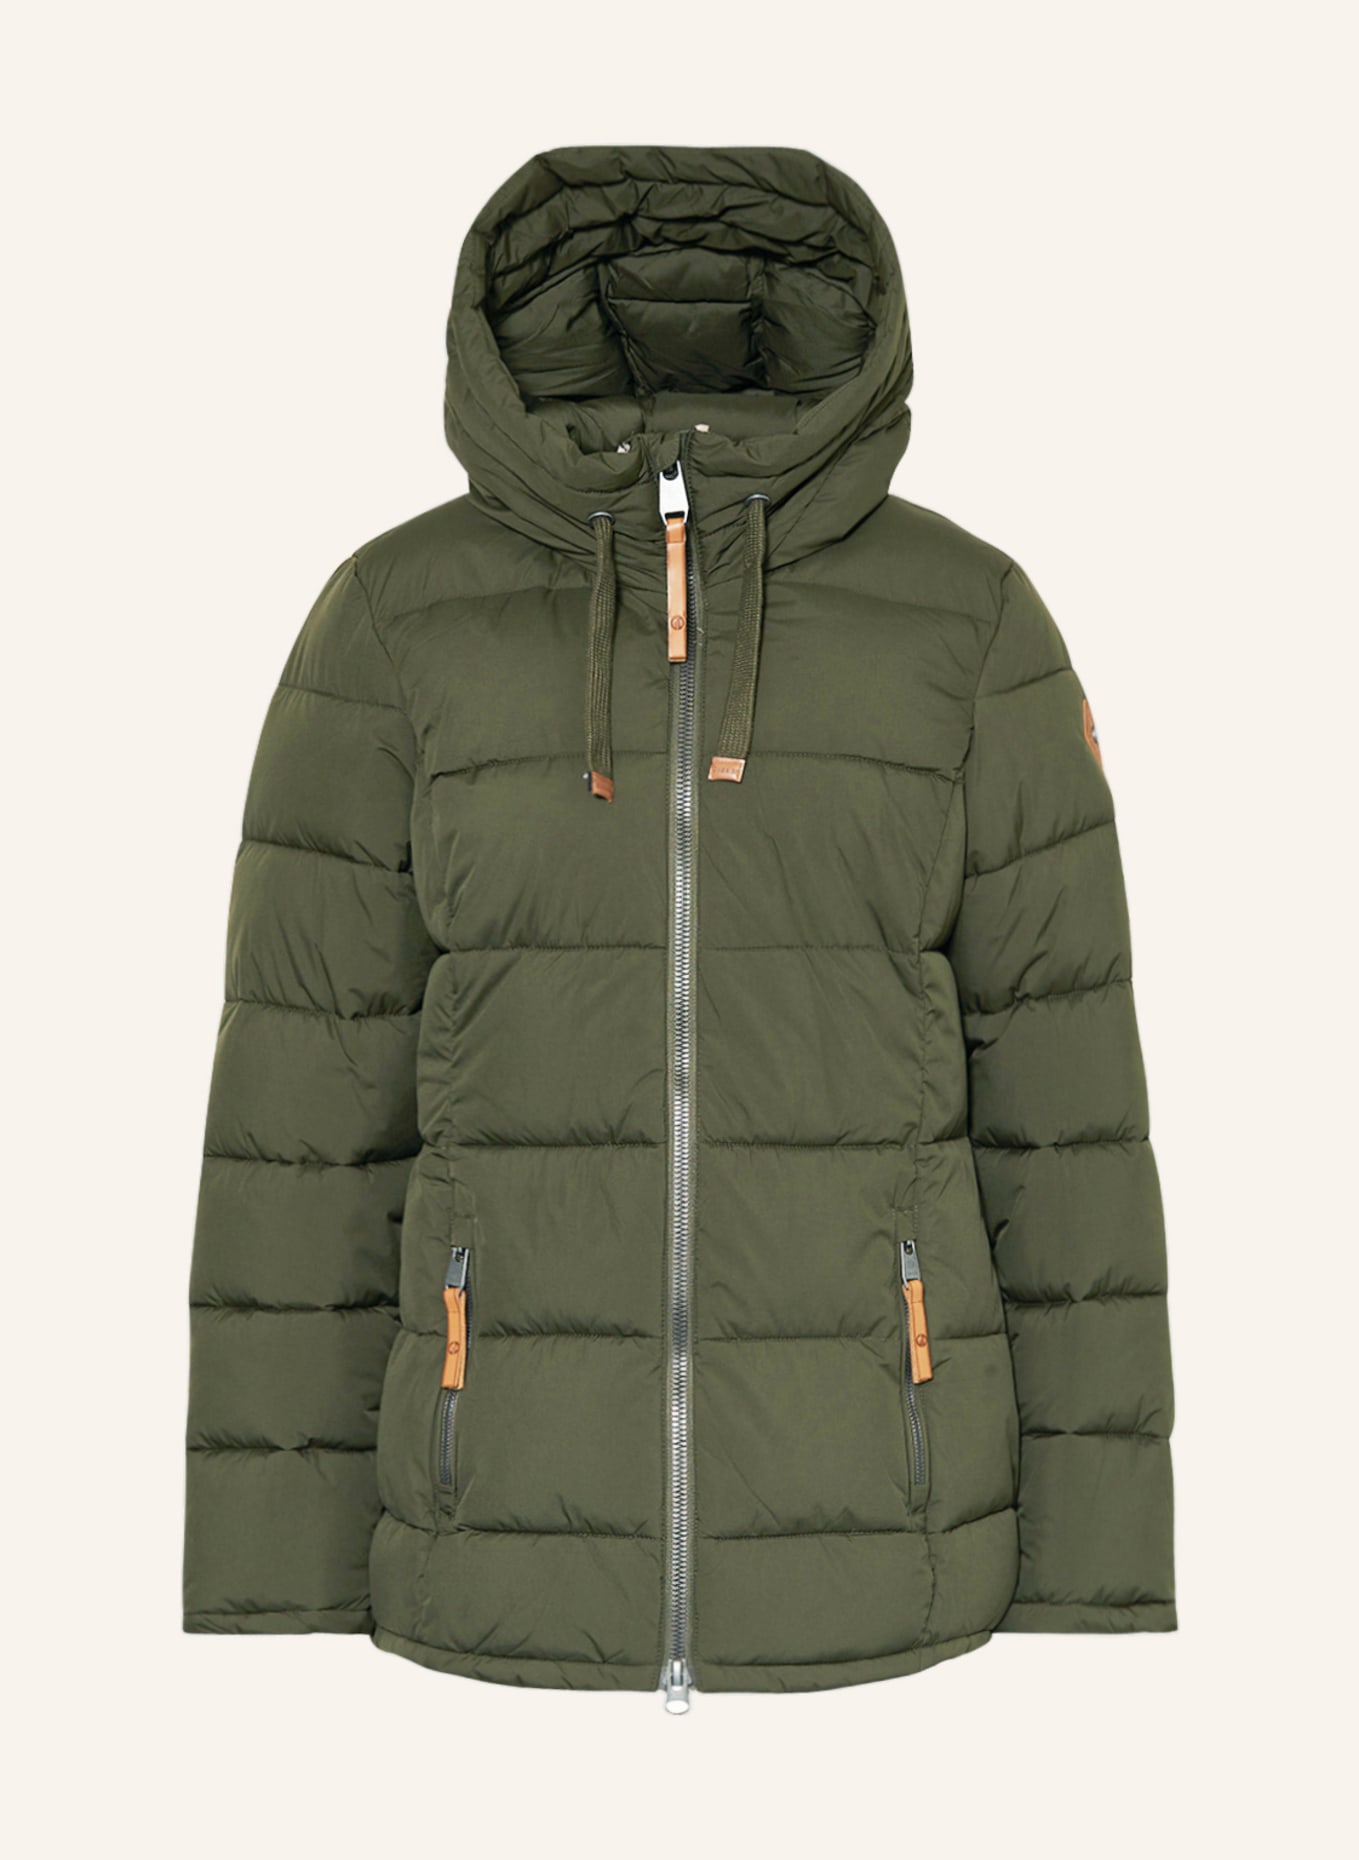 G.I.G.A. DX by killtec Quilted jacket in olive